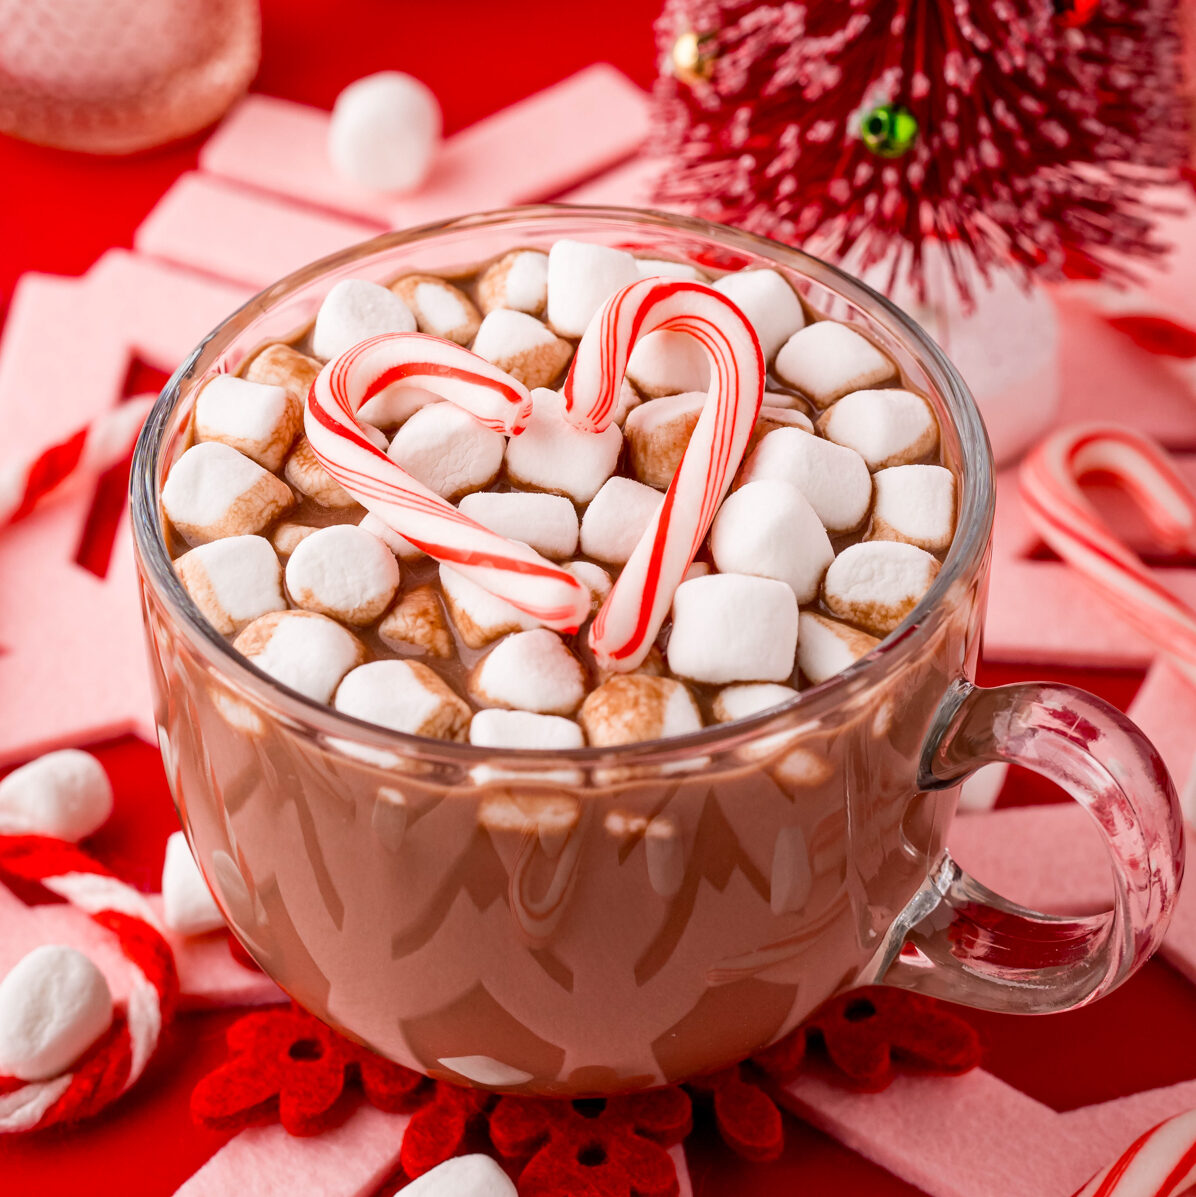 Creamy Peppermint Hot Chocolate Recipe - Play Party Plan